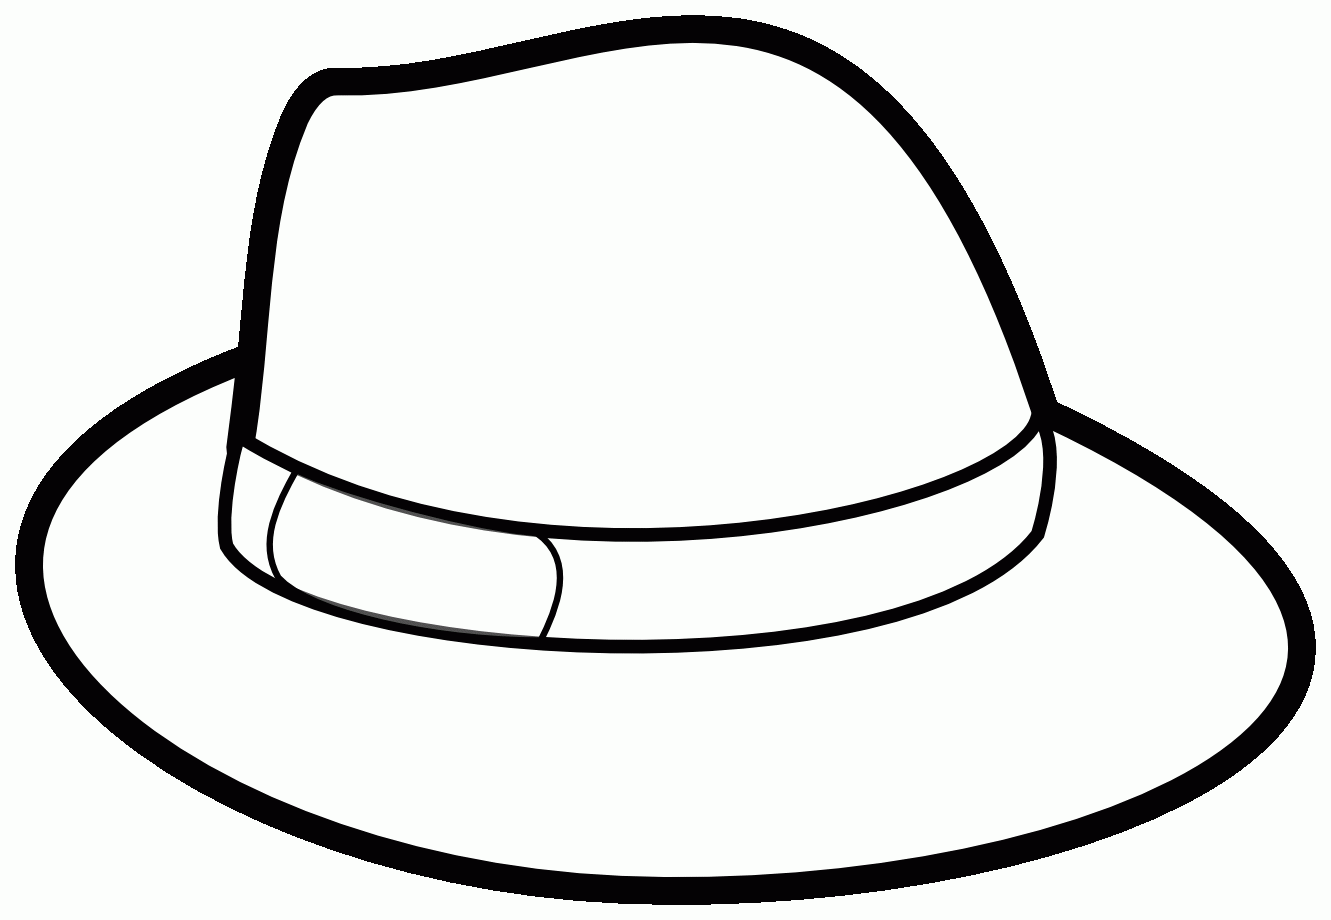 Studying Top Hat Coloring Page Clipart Panda Free Clipart Images ...